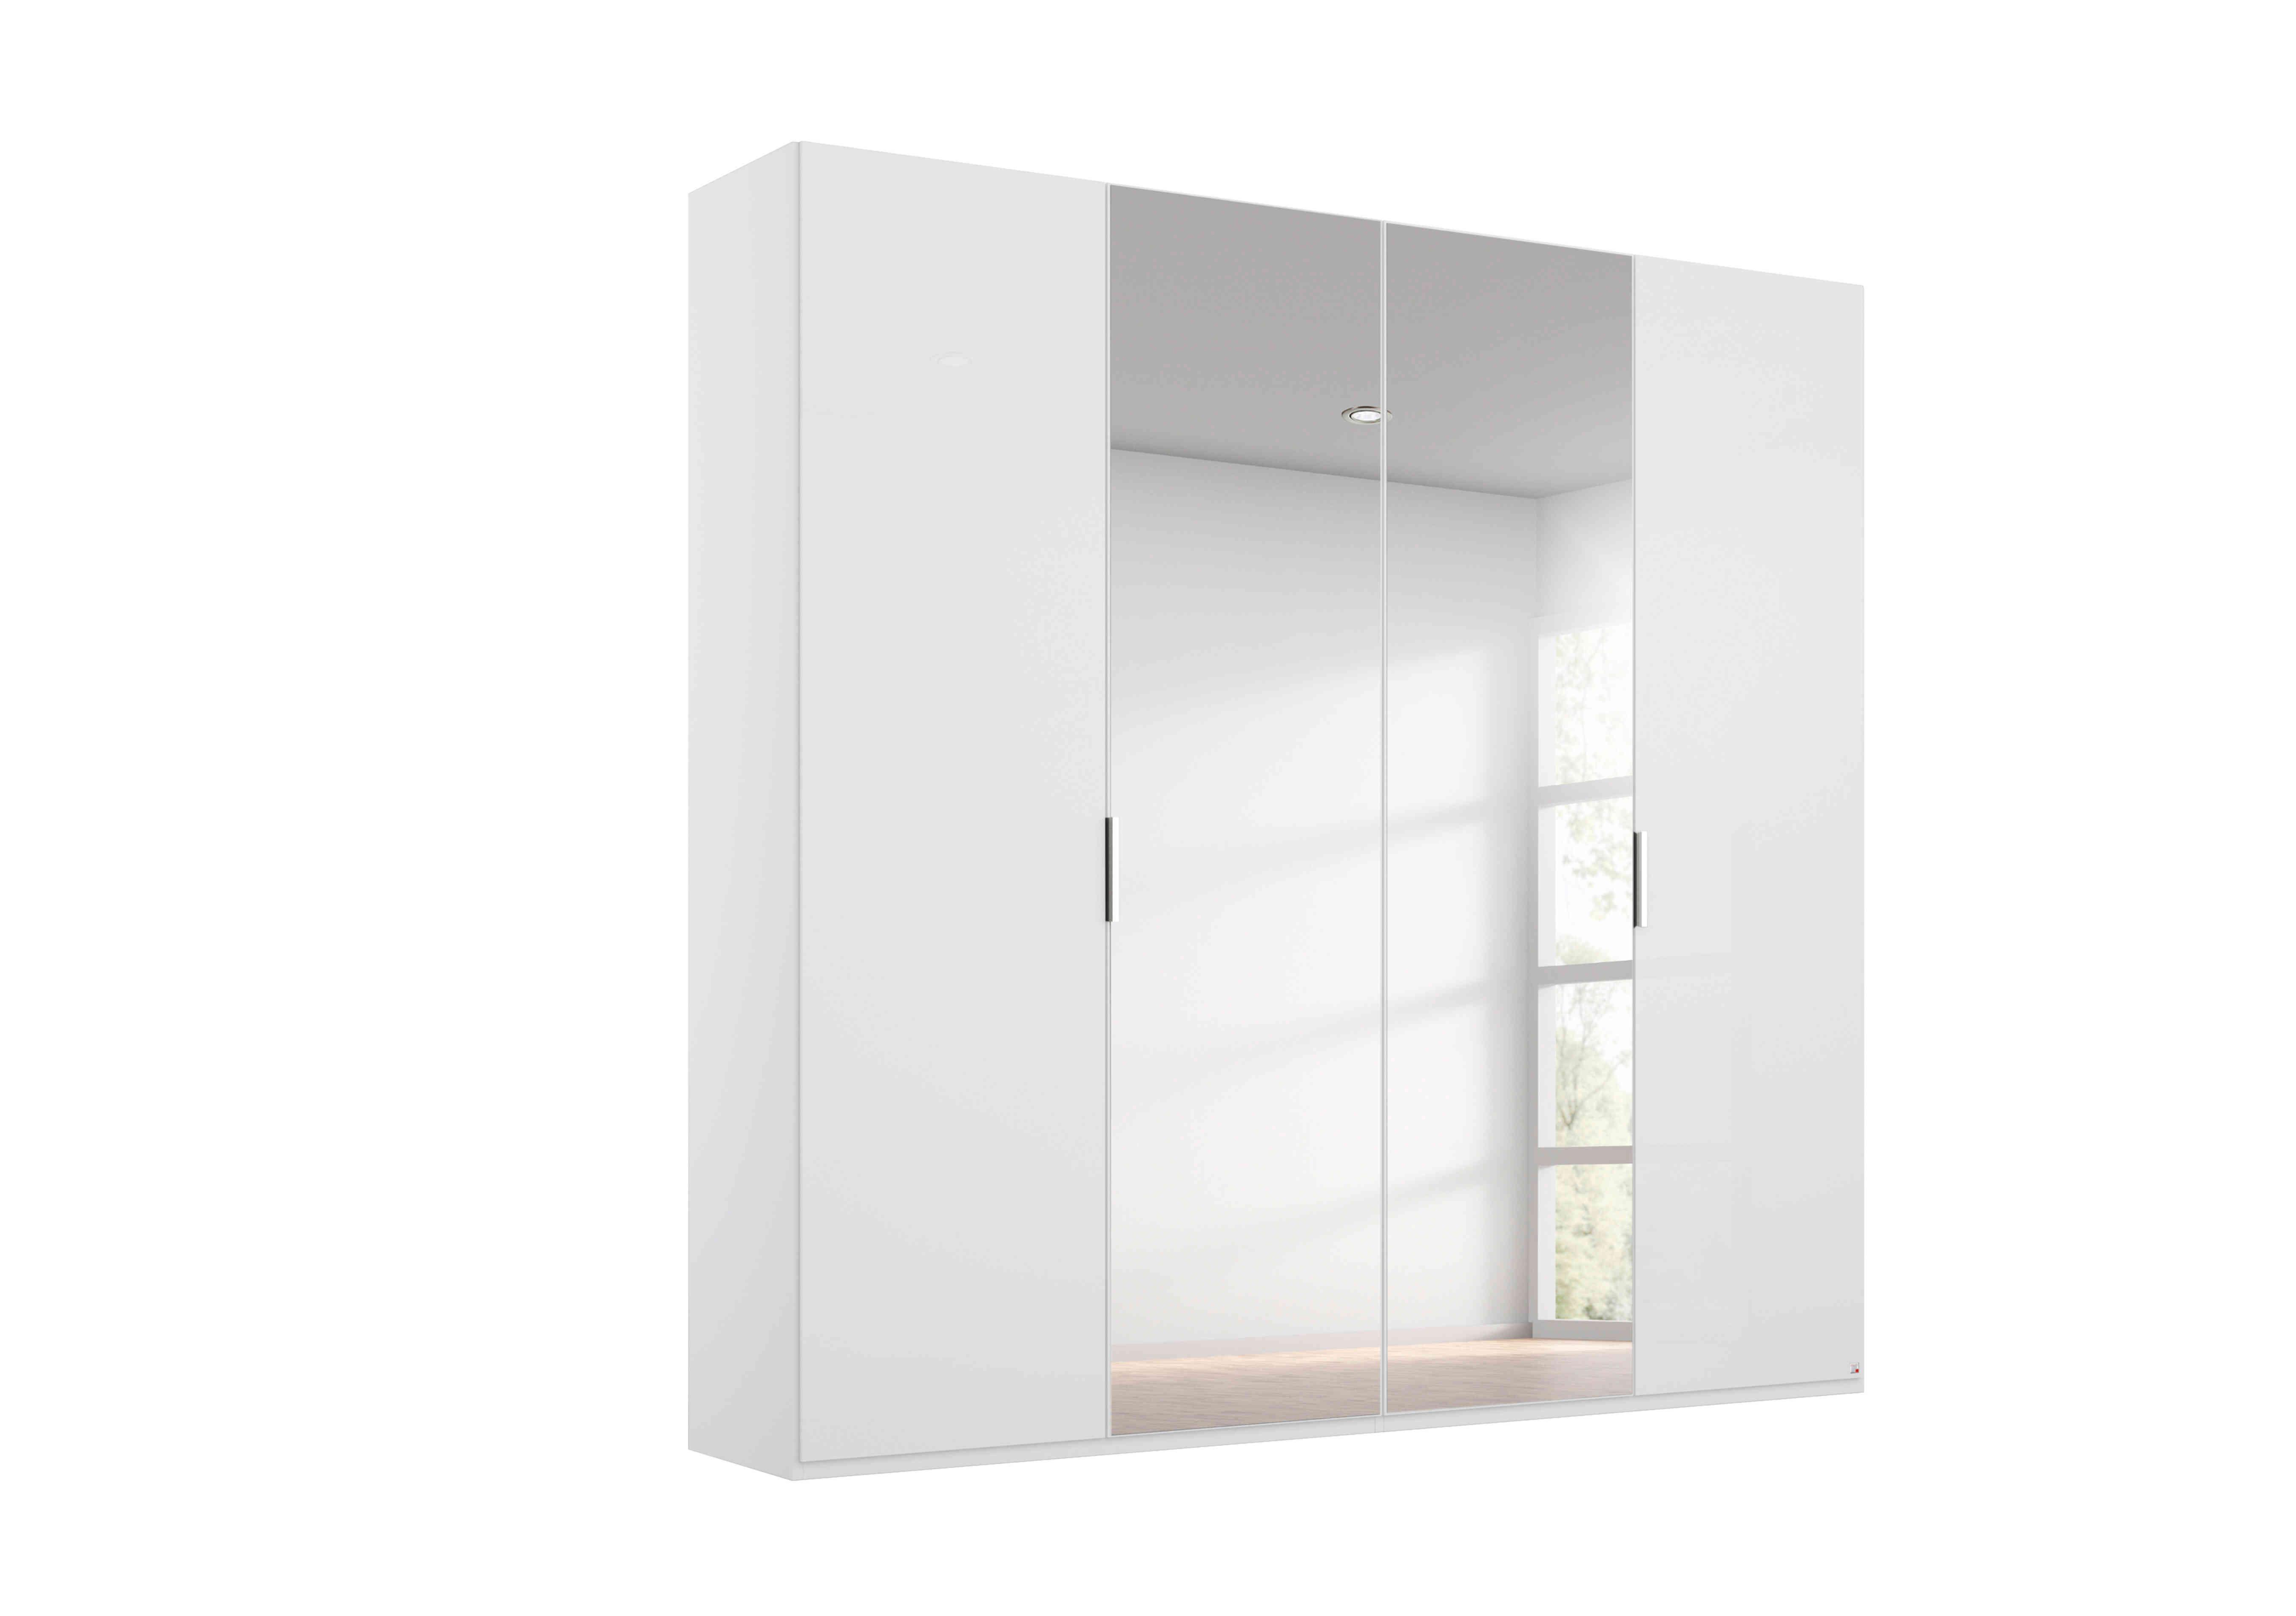 Formes 4 Door Hinged Wardrobe with 2 Glass Doors and 2 Mirrored Doors in A131b White White Front on Furniture Village